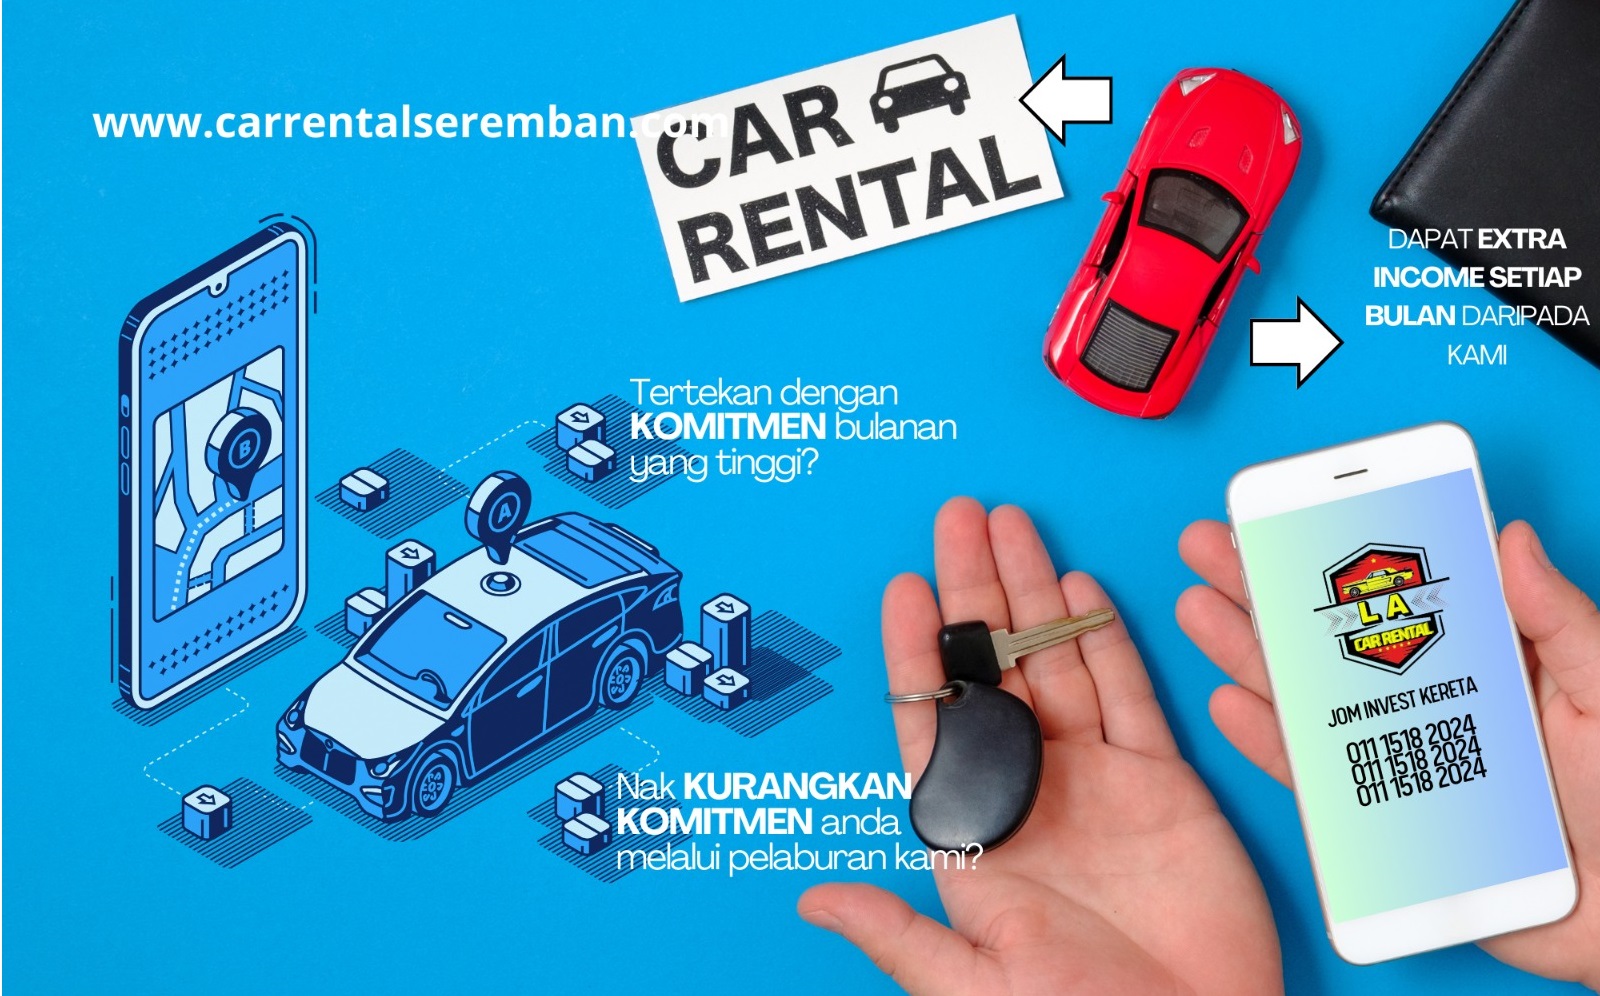 Investment with LA Car Rental